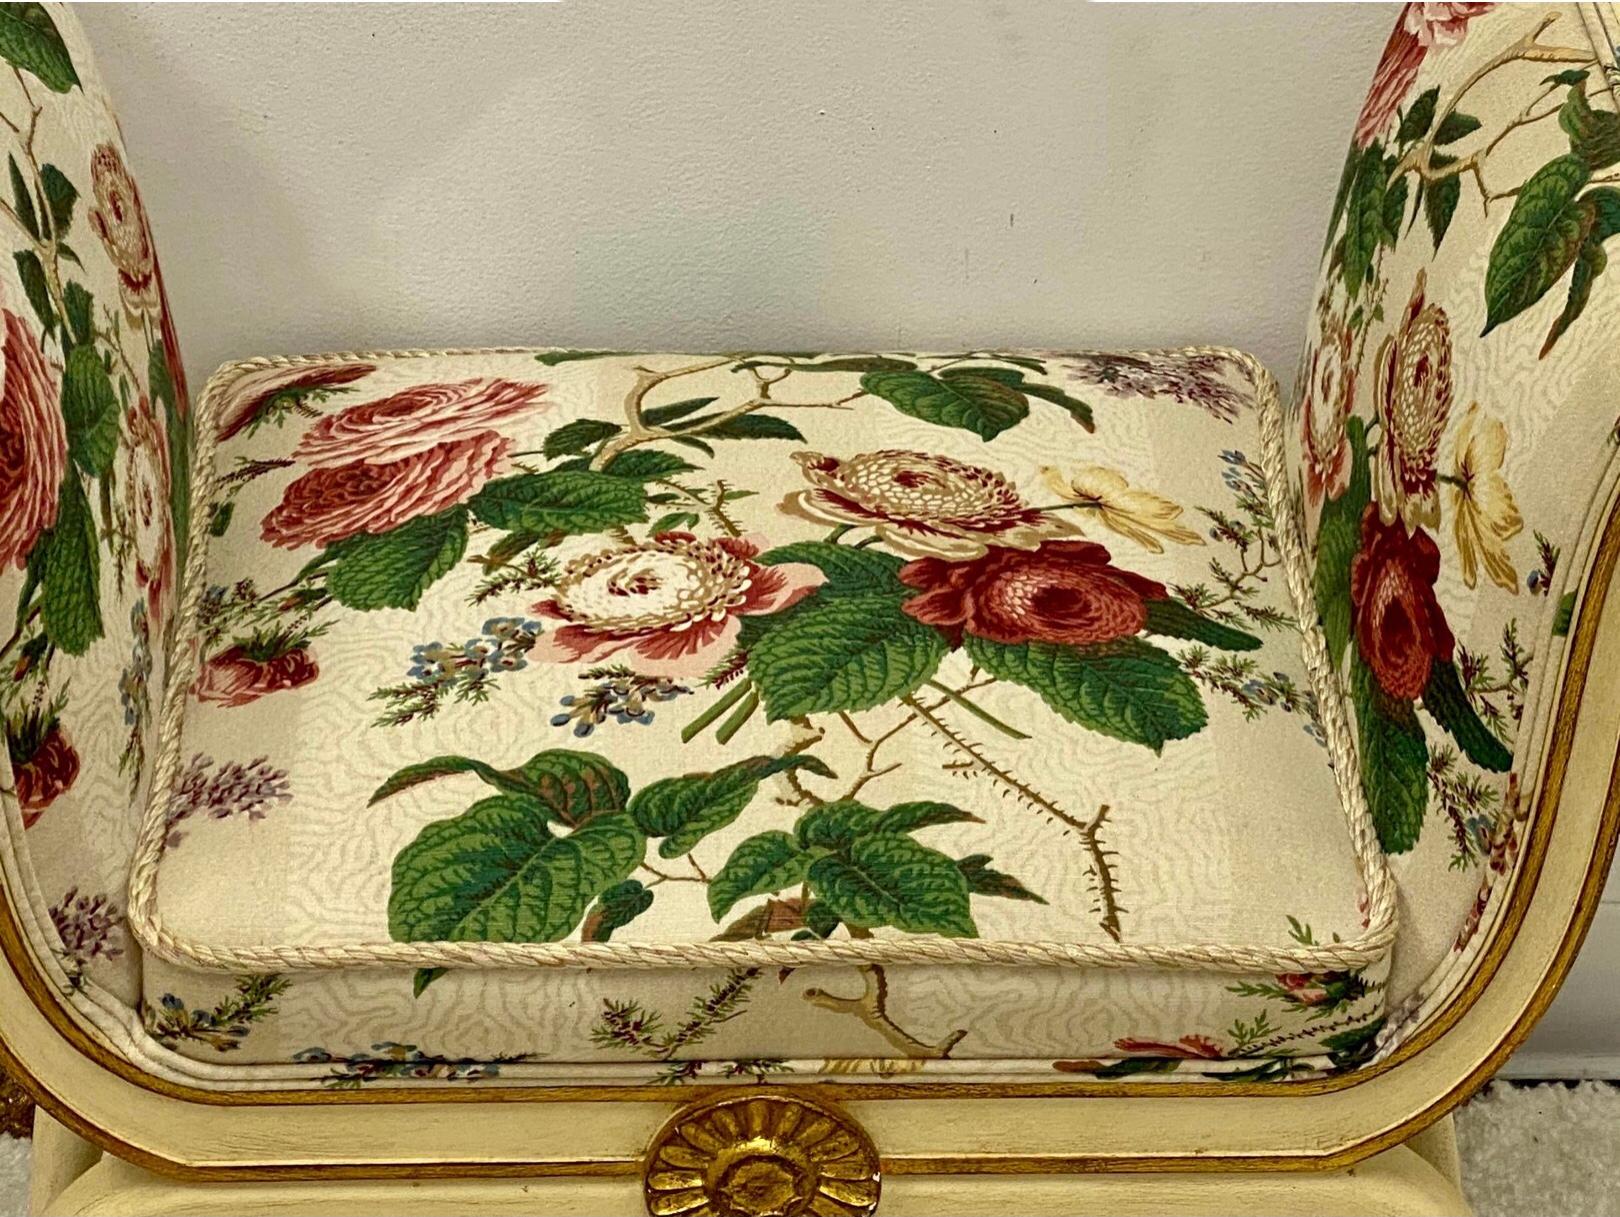 This pair of Mario Buatta style benches in floral chintz fabric have Classic Regency frames. They were created by Schumacher and are in excellent condition. Measure: Seat 16.5”.